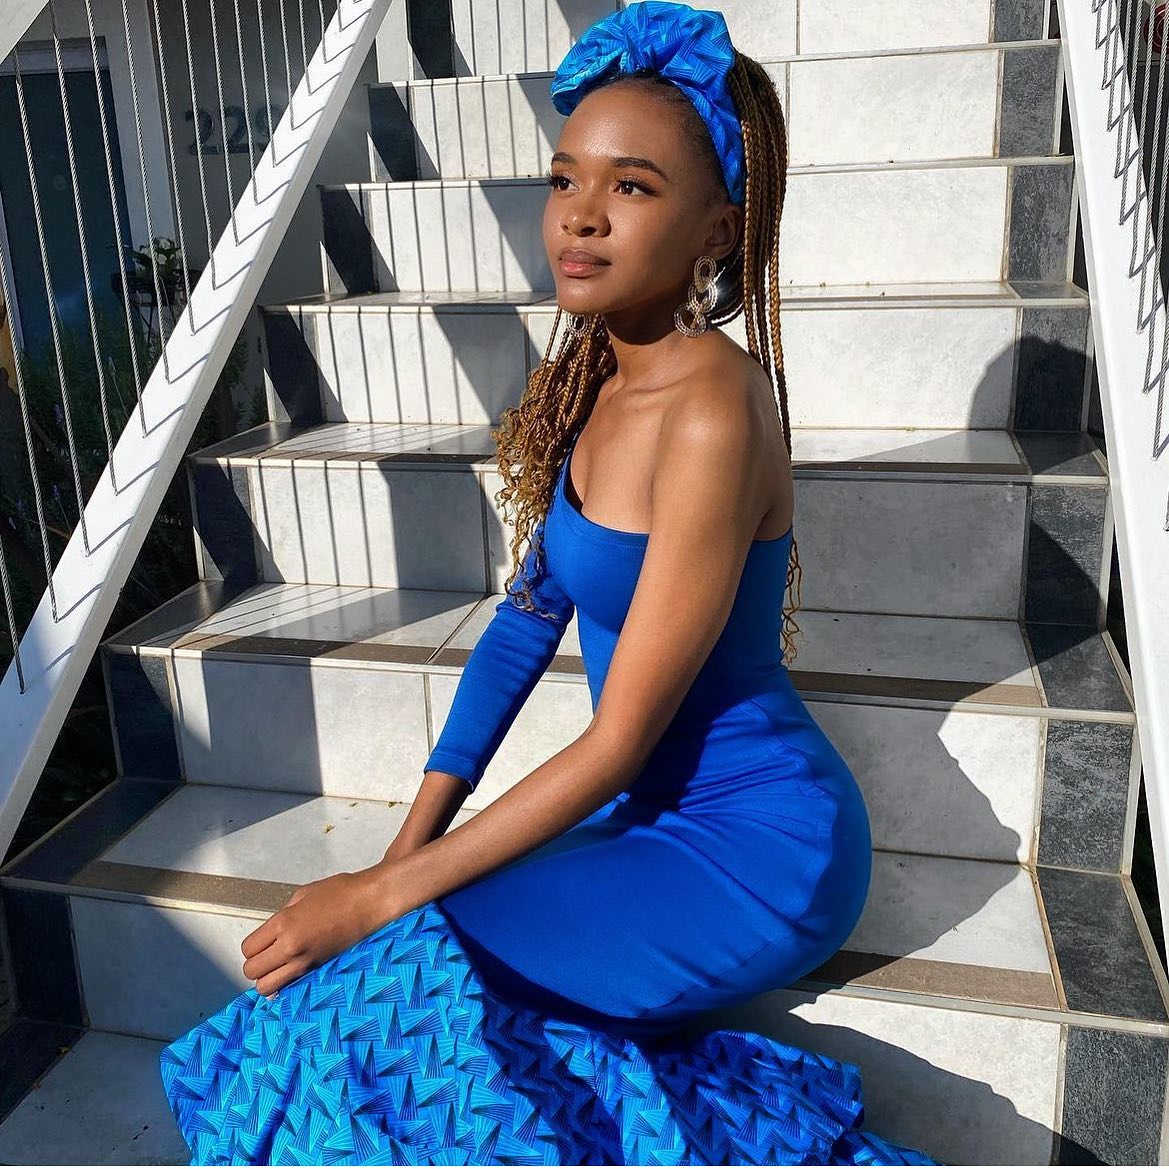 Tswana Traditional Dresses: Exploring the Artistic Techniques and Materials Used 26